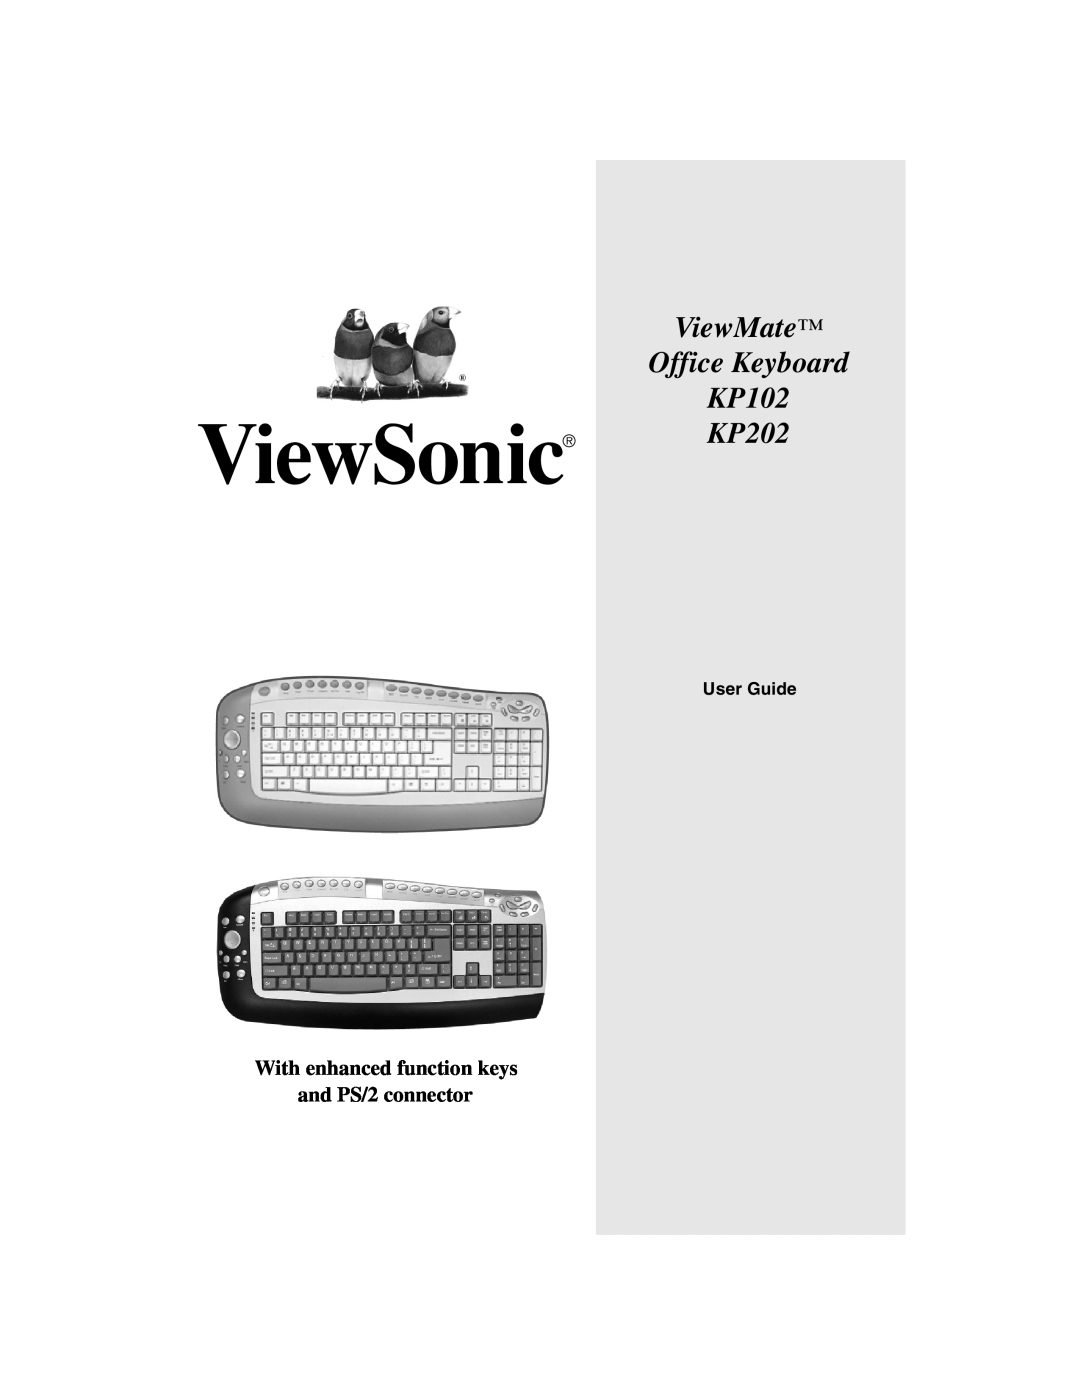 ViewSonic manual With enhanced function keys and PS/2 connector, User Guide, ViewMate Office Keyboard KP102 KP202 